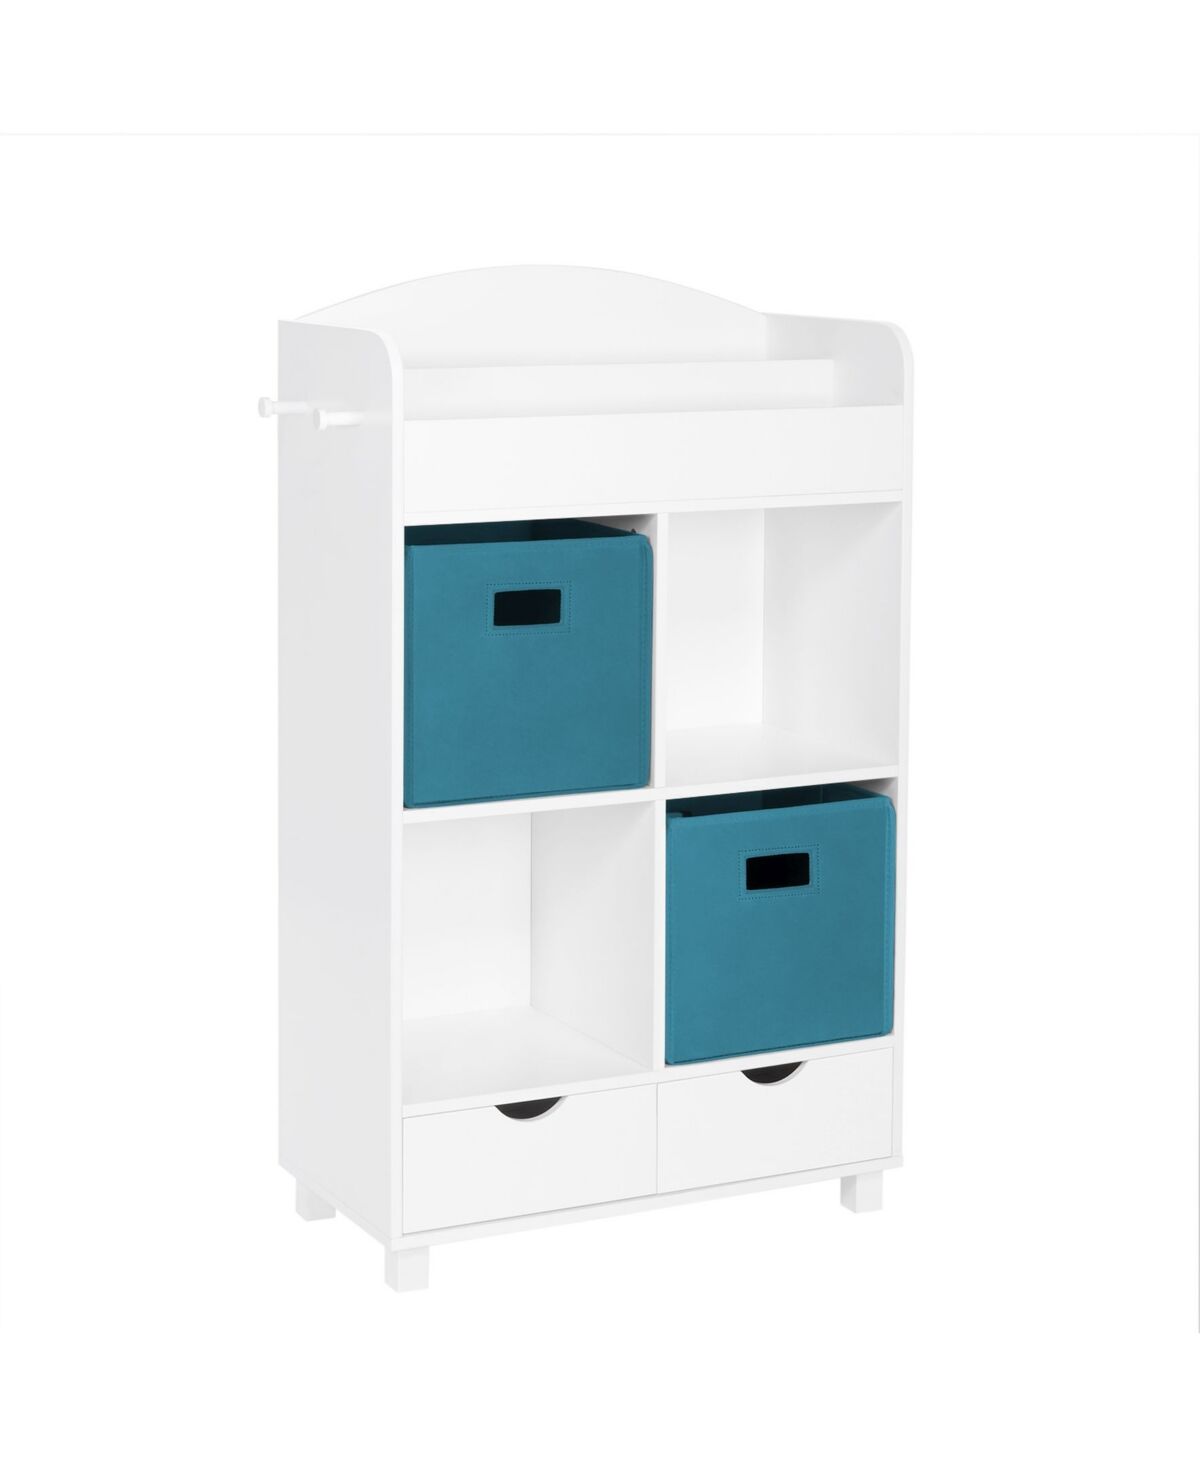 RiverRidge Home Book Nook Collection Kids Cubby Storage Cabinet with Bookrack - Turquoise